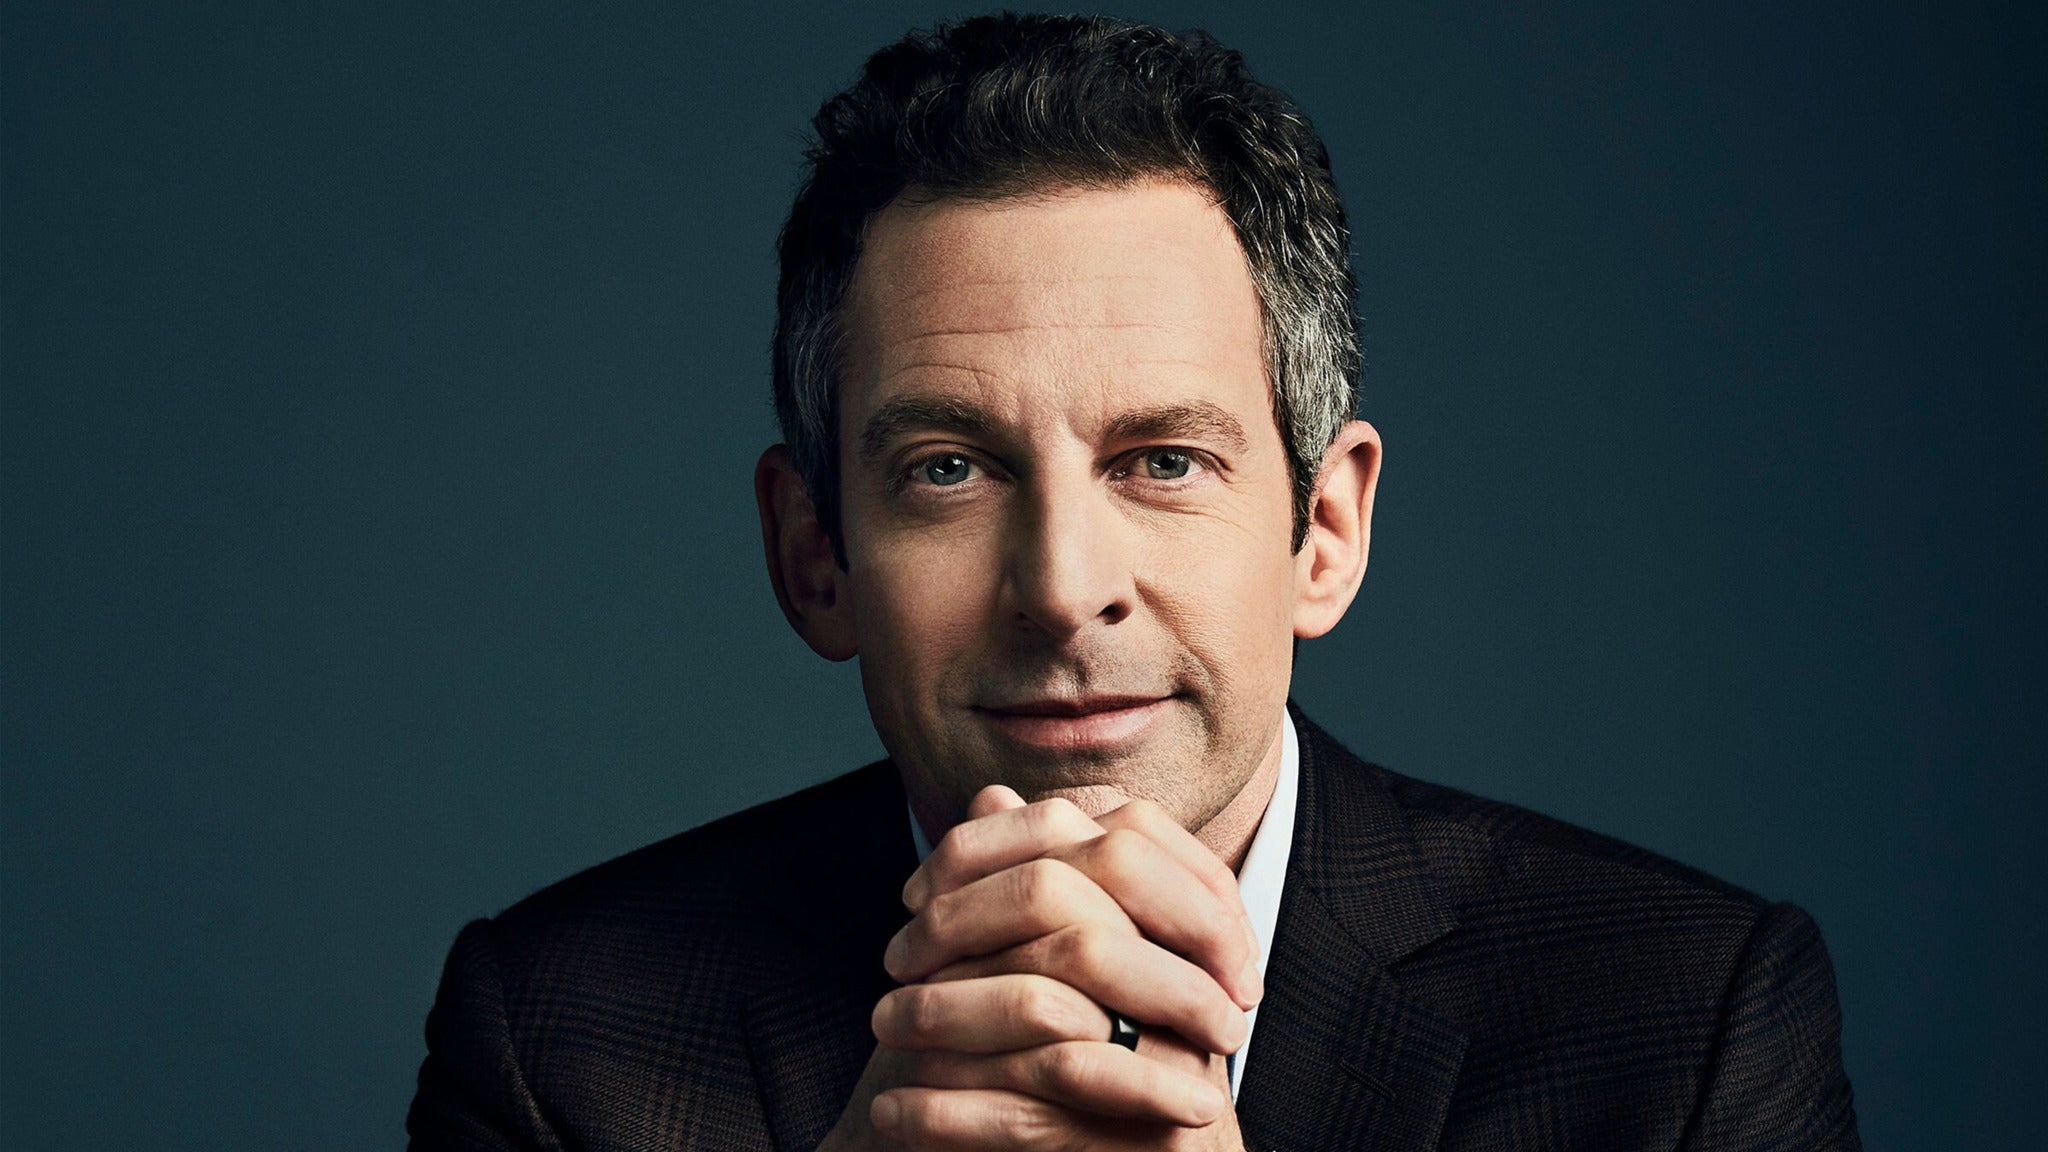 Sam Harris and the Waking Up Podcast in Dallas promo photo for Venue / presale offer code